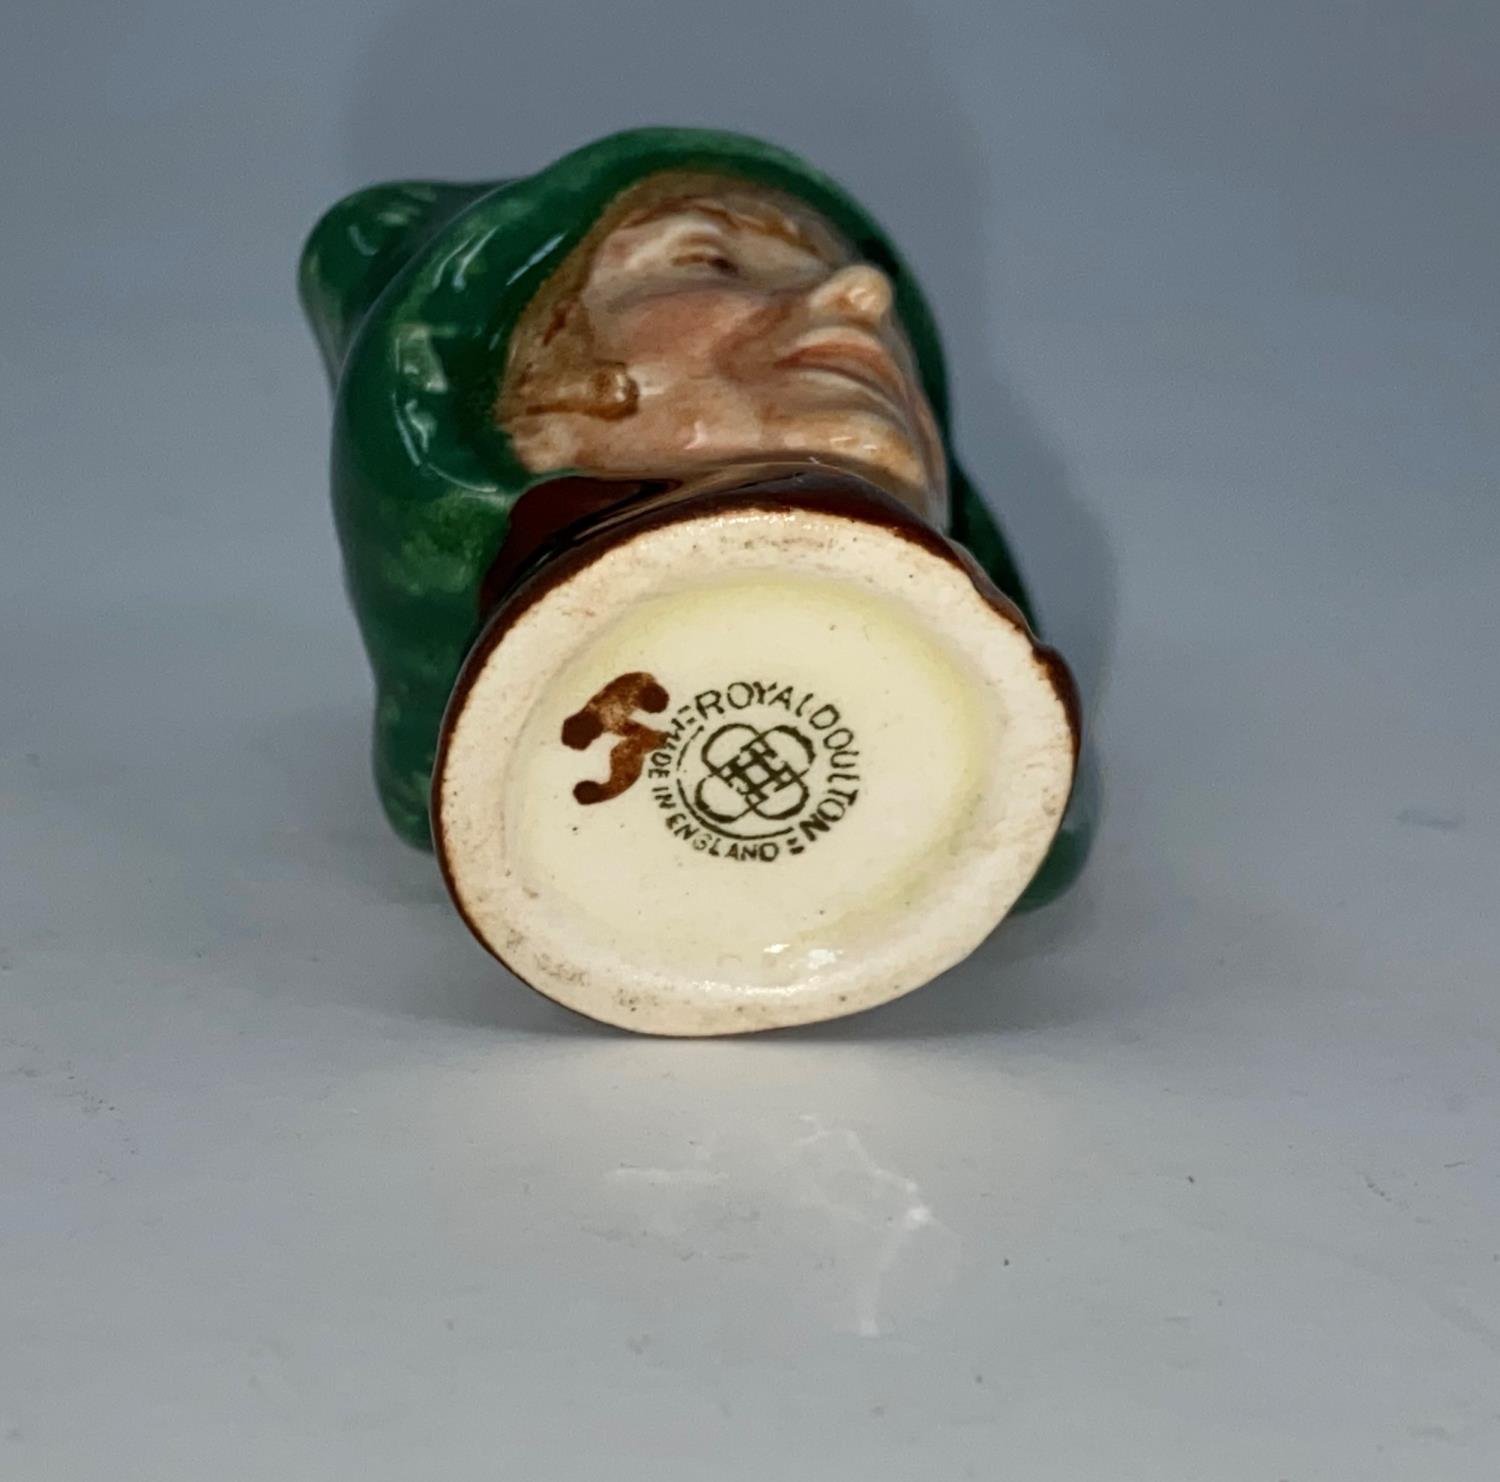 A miniature Royal Doulton character jug - Arriet - Image 2 of 2